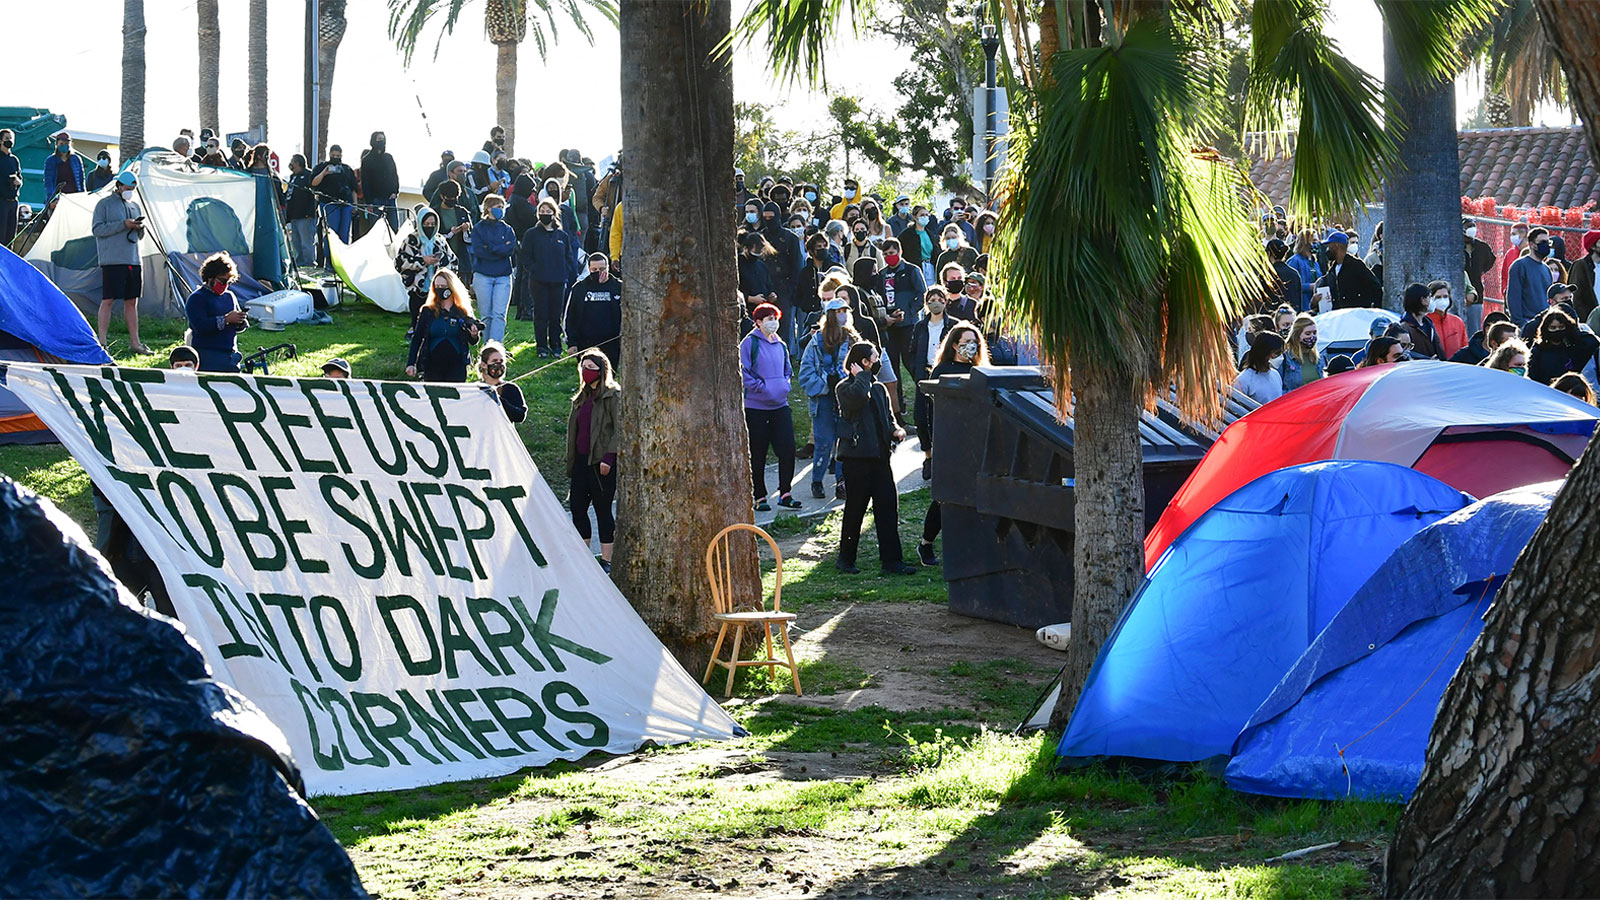 Social activists, homeless residents, and supporters rally at the start of a 24-hour vigil to block a planned shutdown of a homeless encampment at Echo Lake Park in Los Angeles